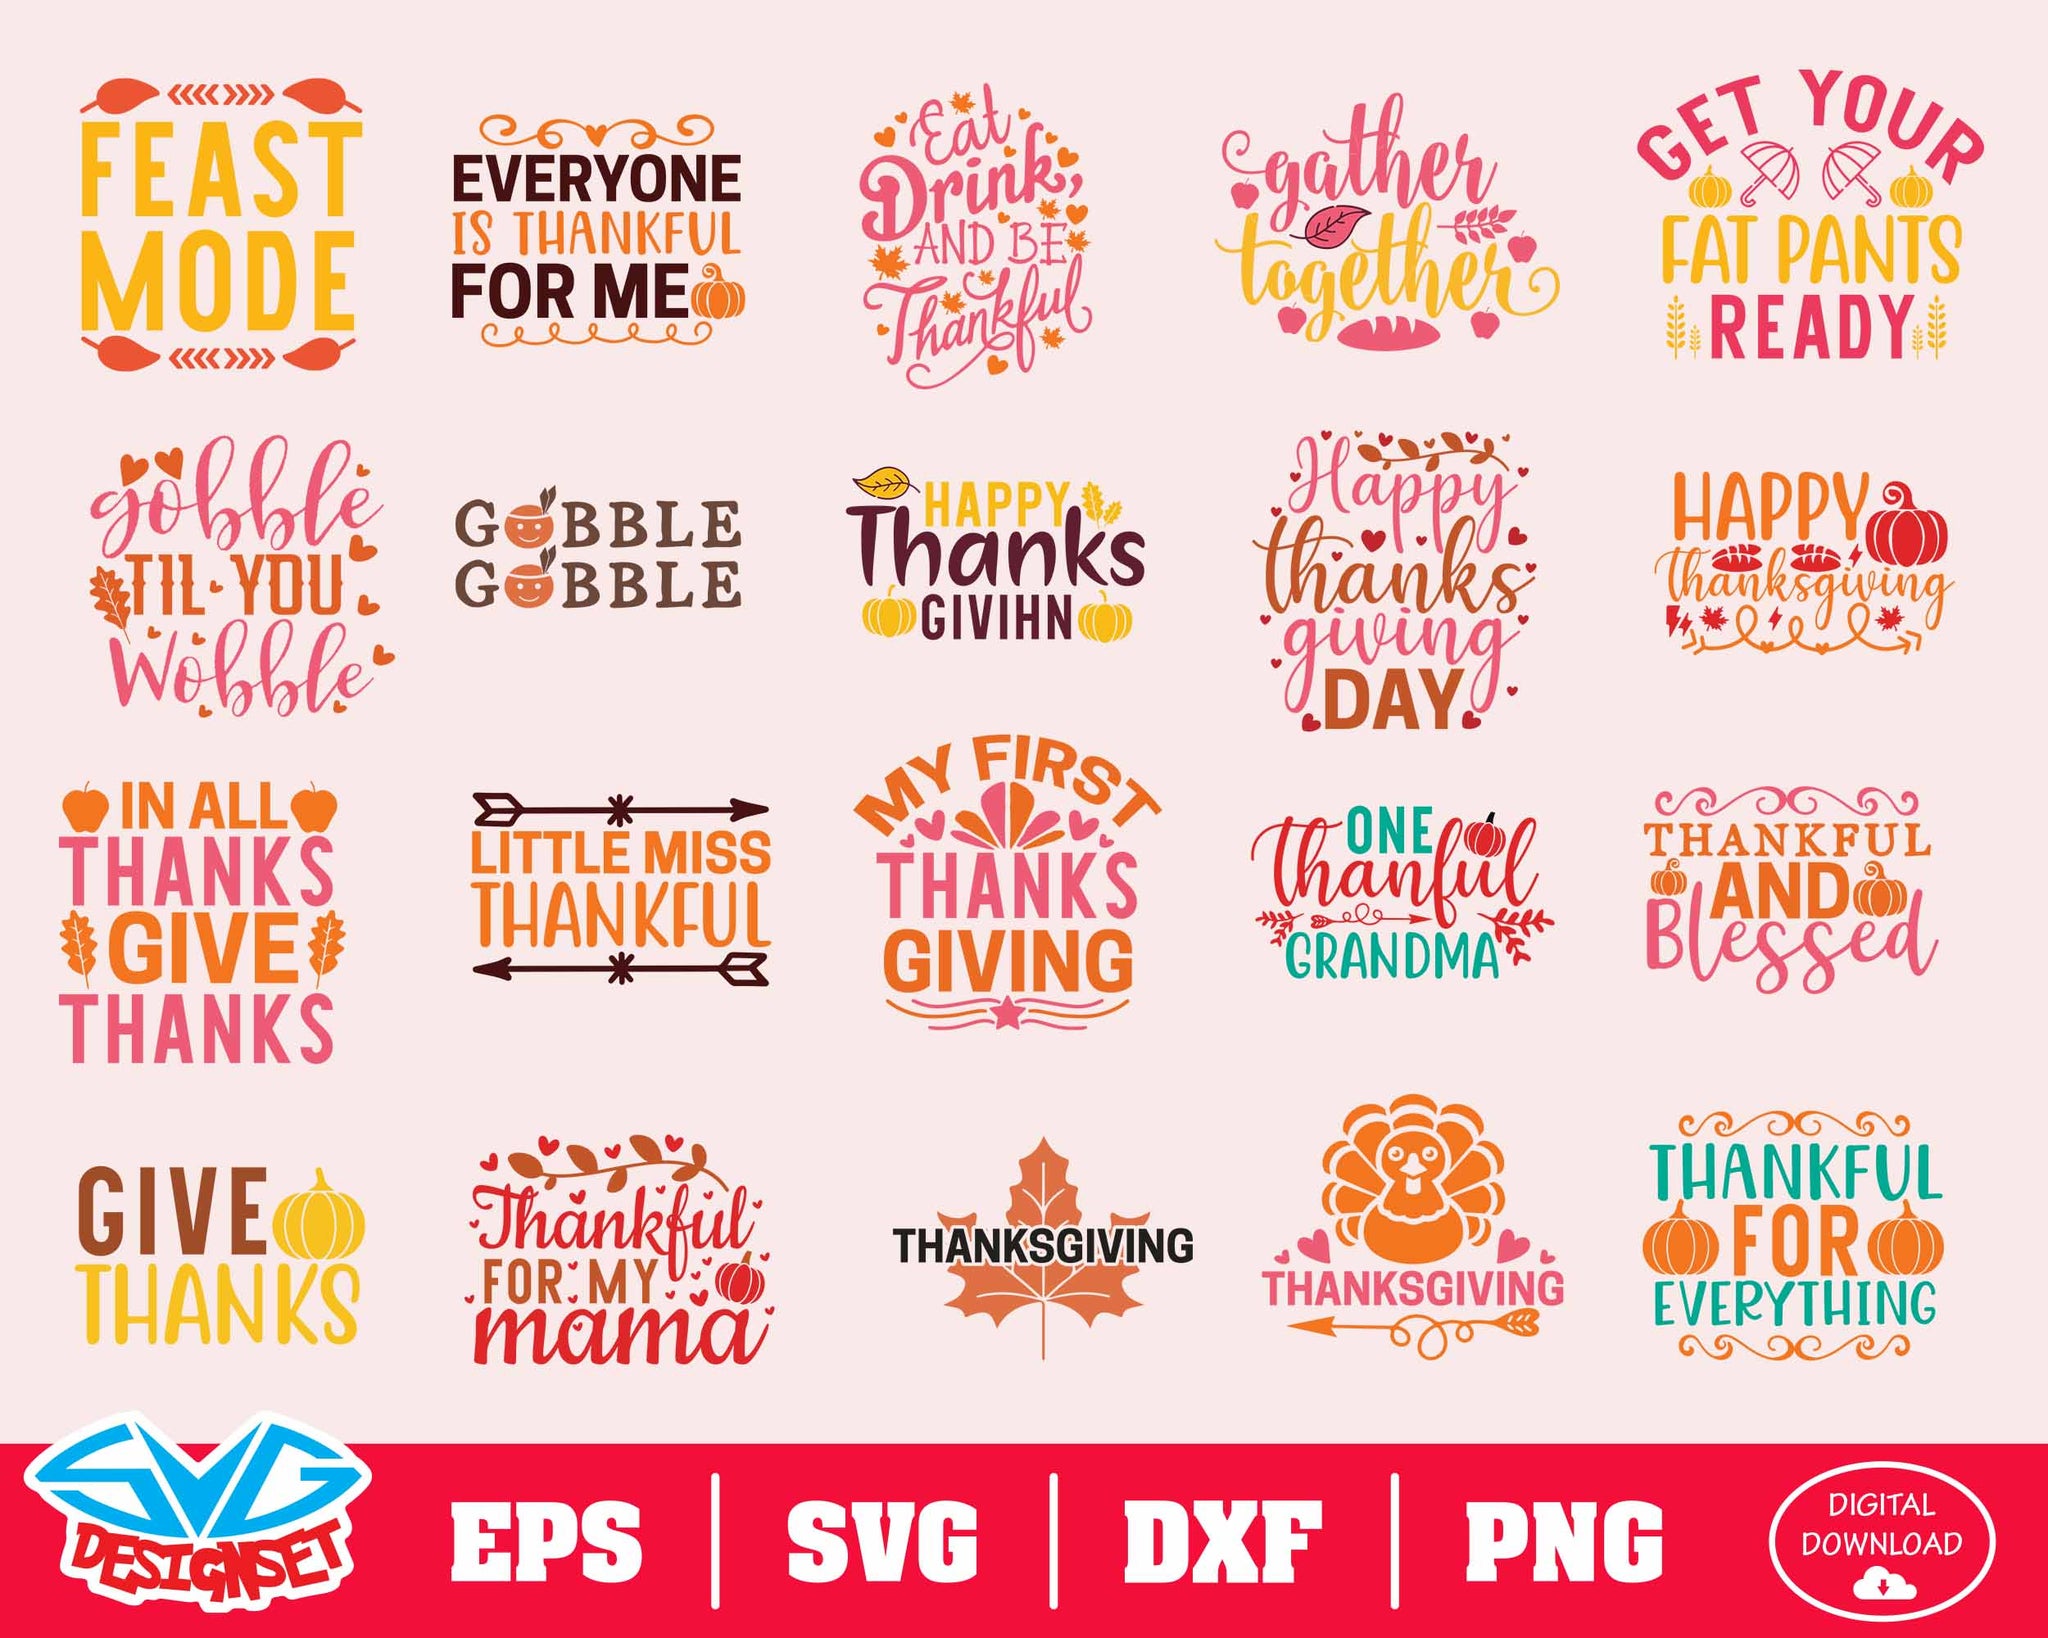 Thanksgiving Svg, Dxf, Eps, Png, Clipart, Silhouette and Cutfiles #5 - SVGDesignSets